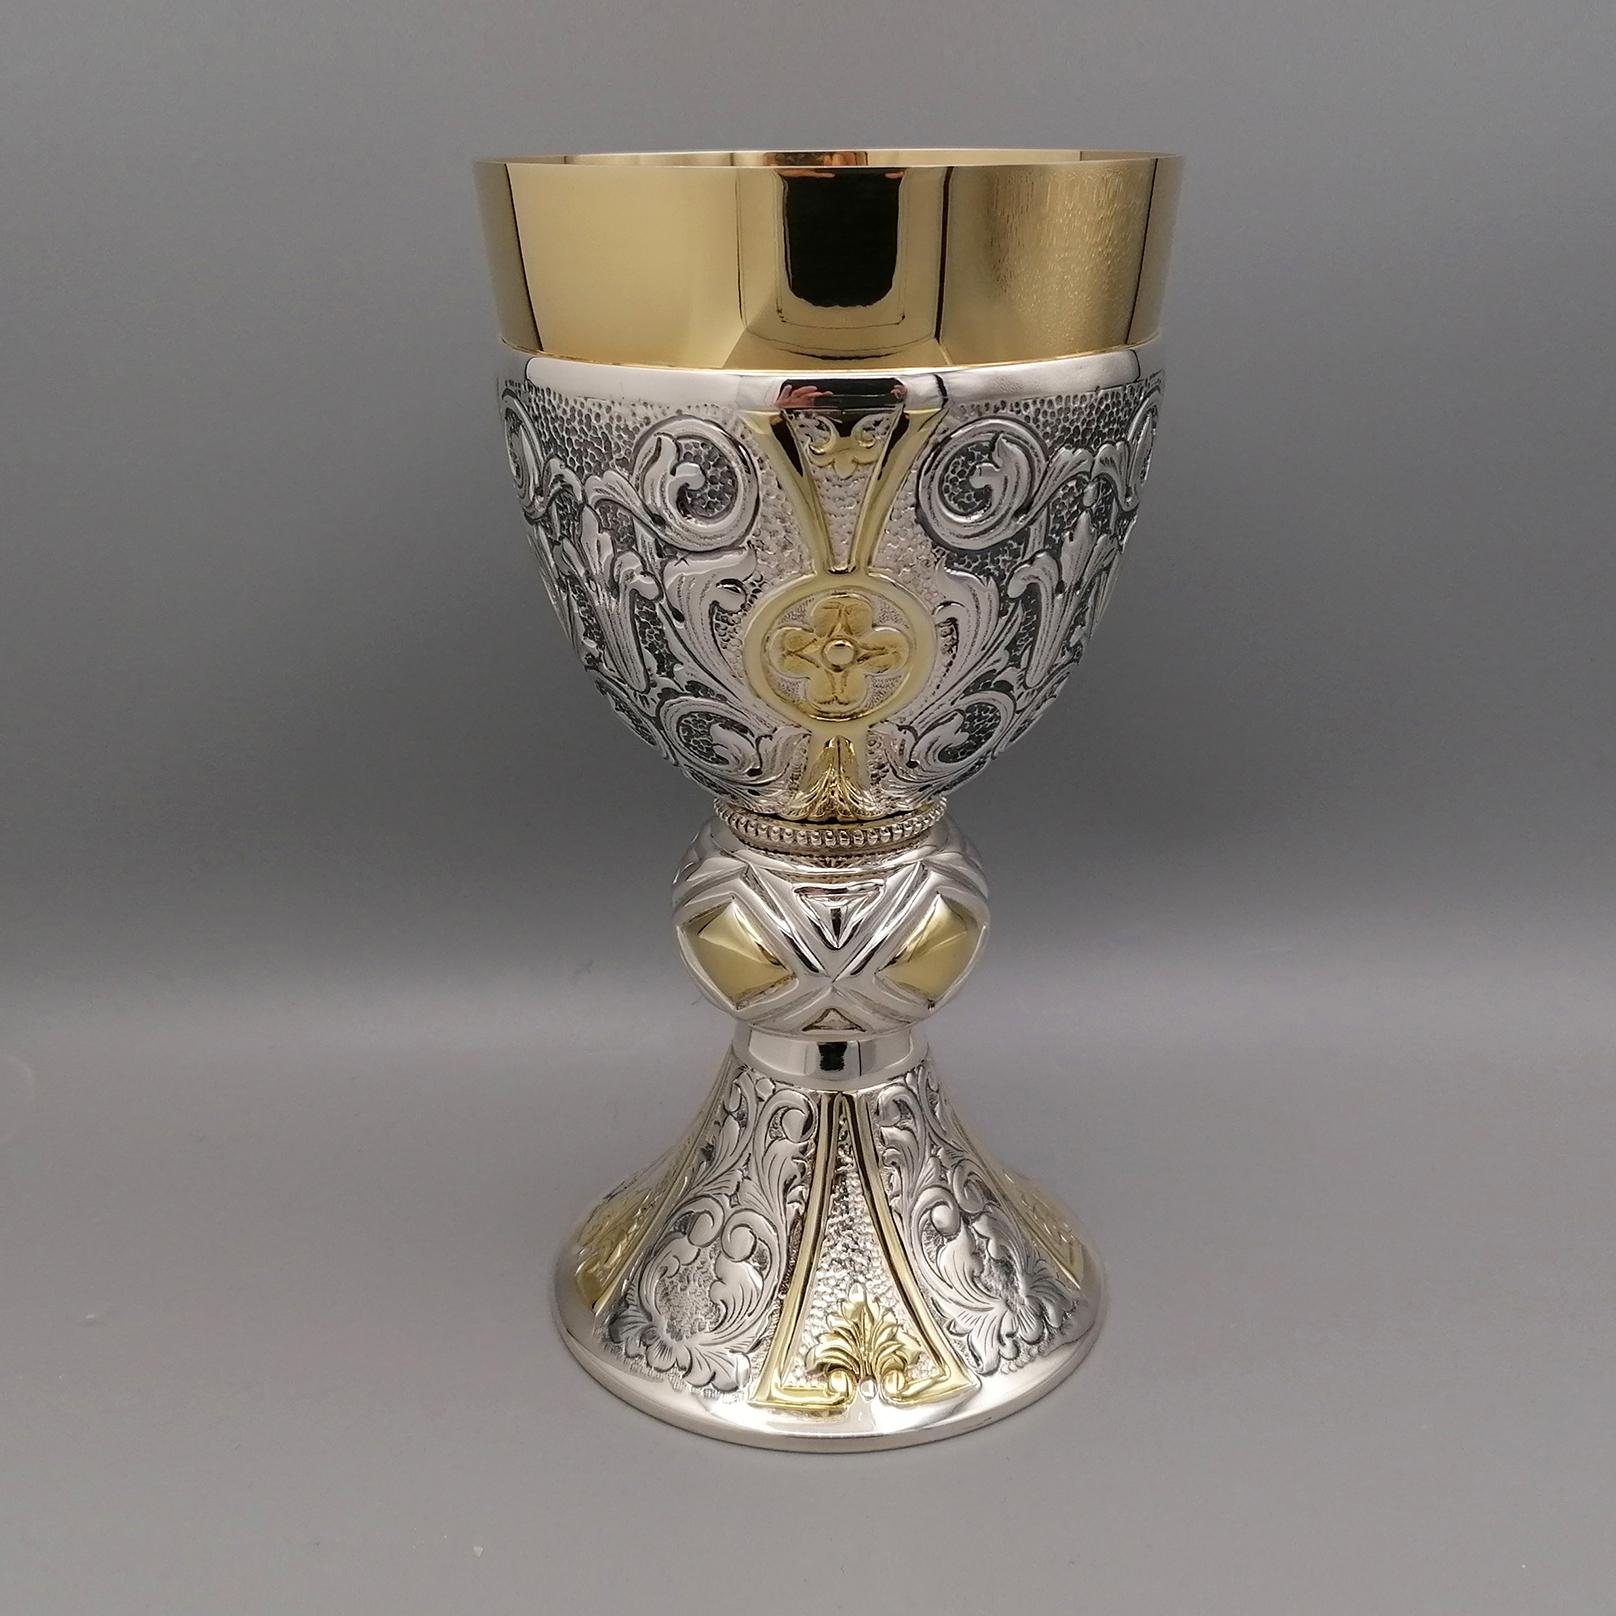 Liturgical chalice in sterling silver.
Volutes have been embossed on the base of the chalice, typical of the Baroque style, interspersed with hammered parts.
A golden cup has been inserted into the upper part of the liturgical chalice, also